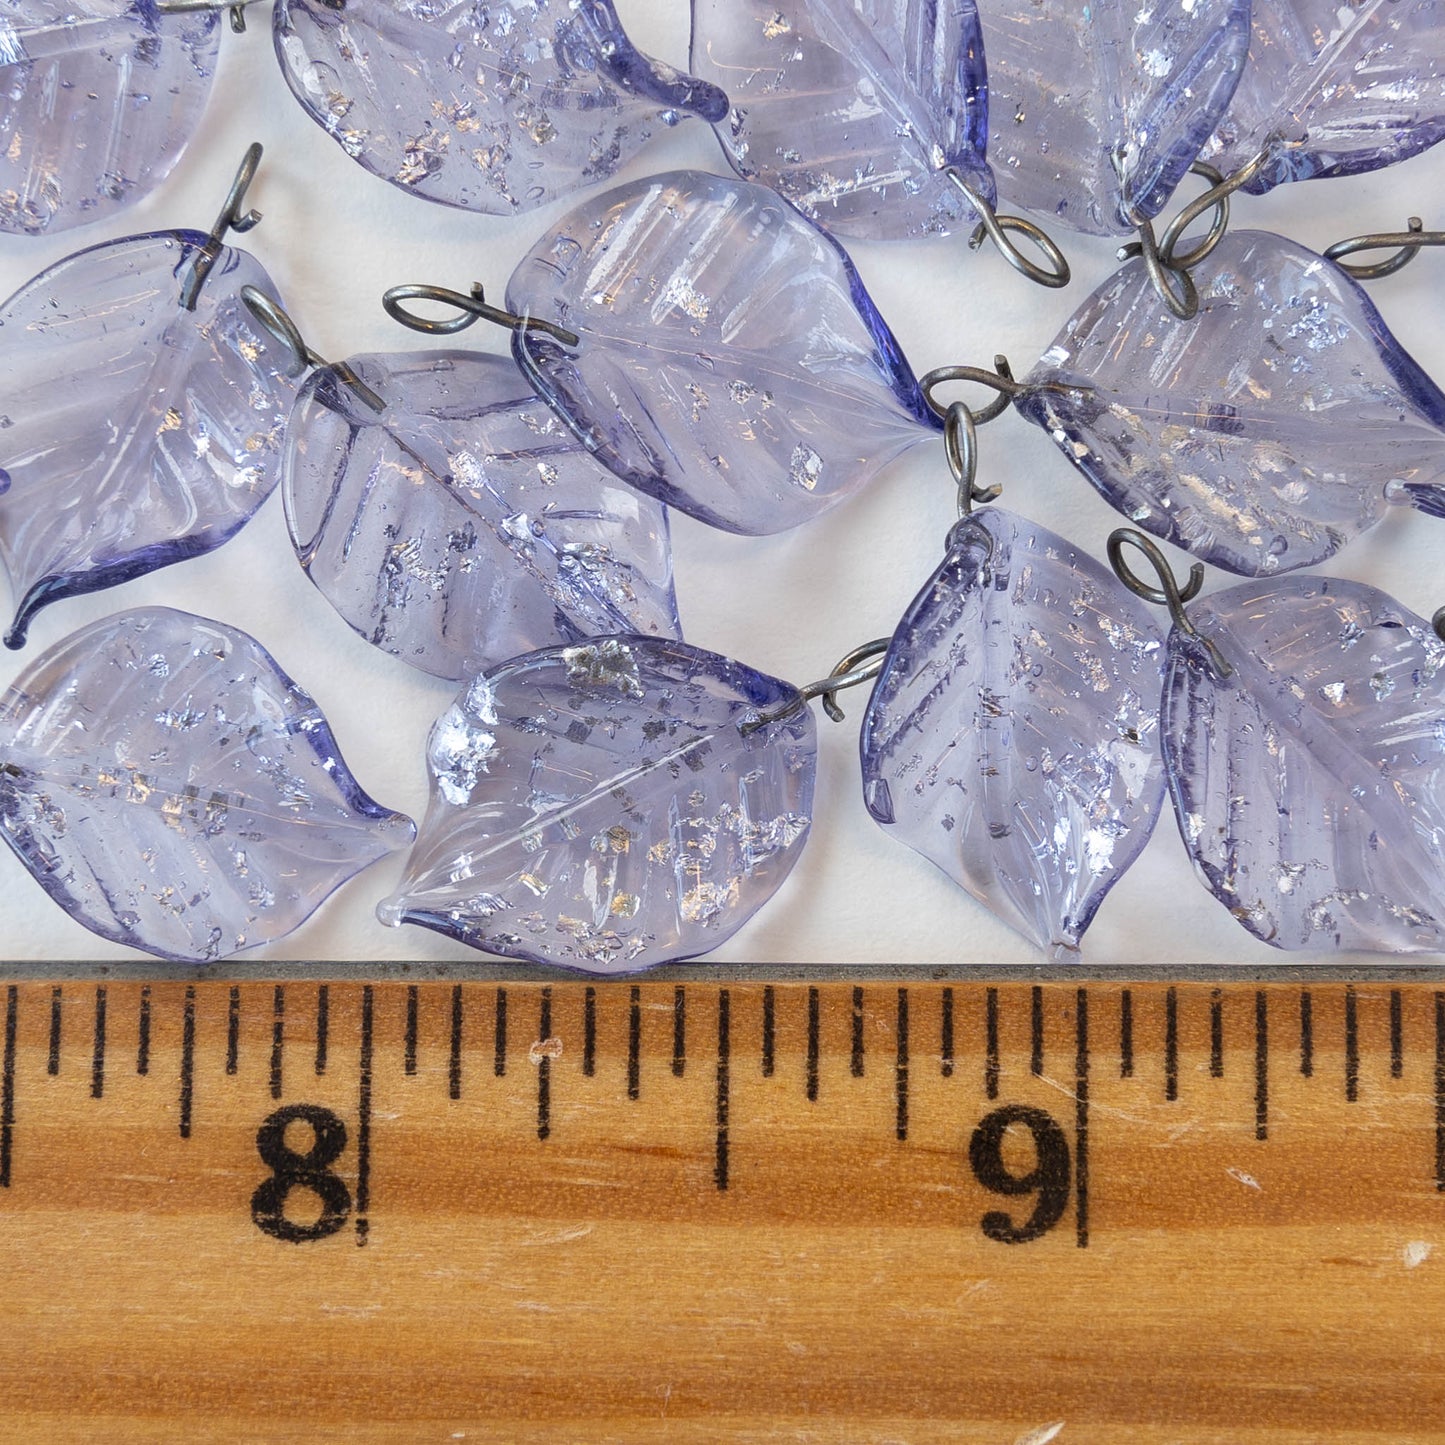 Handmade Glass Leaf Beads - Lavender with Silver Dust - 2 leaves